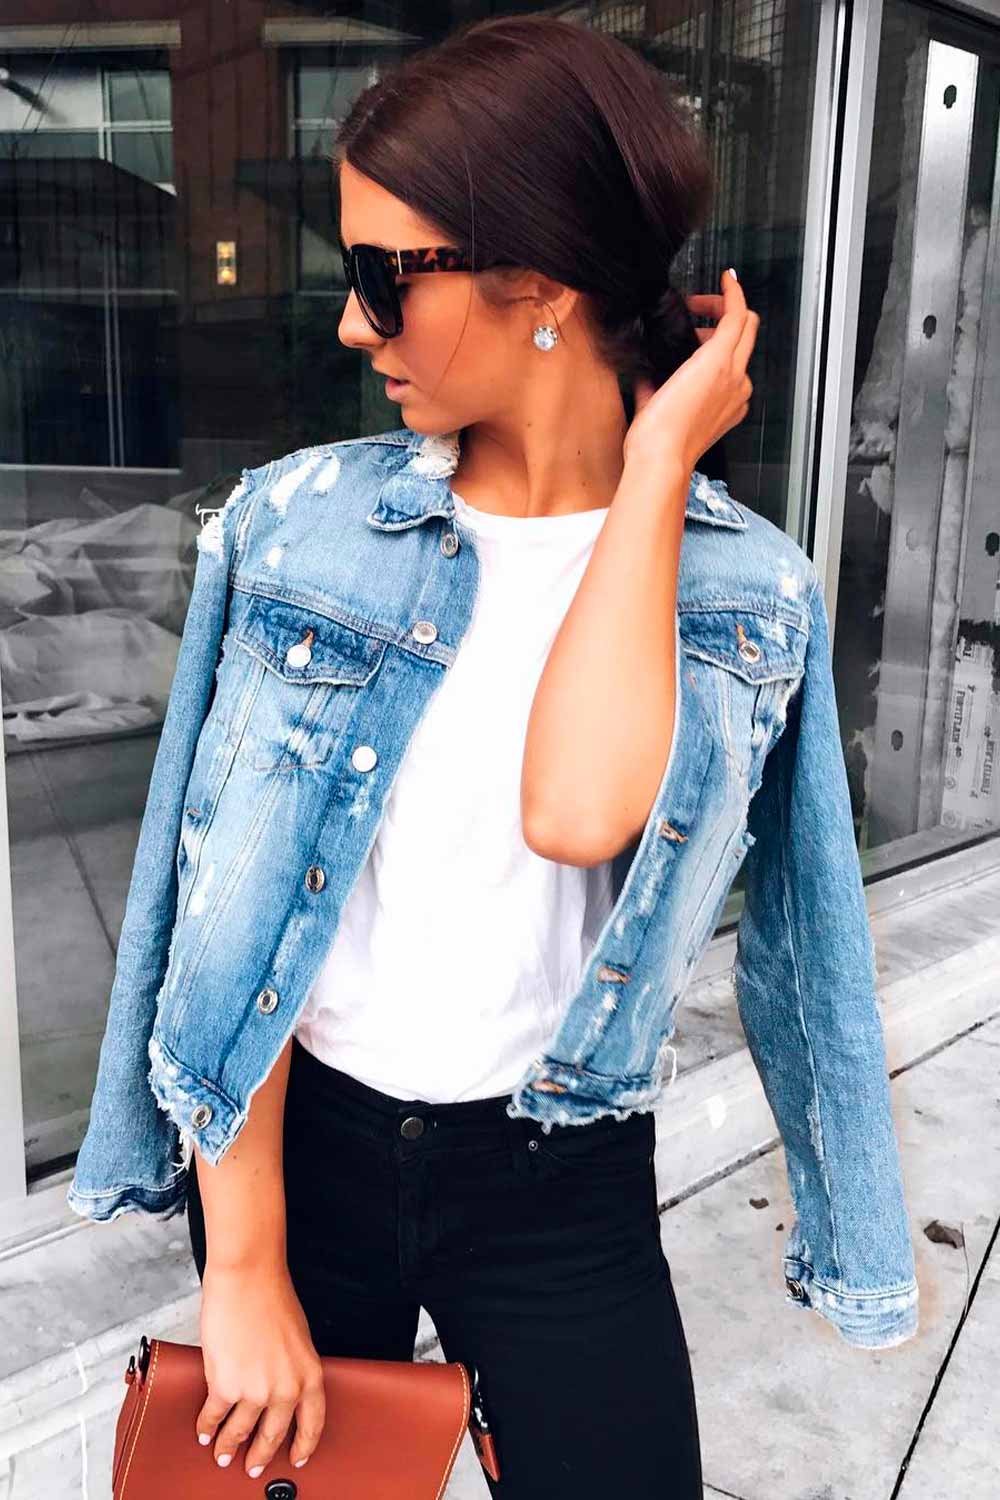 What to Match With Your Denim Jacket